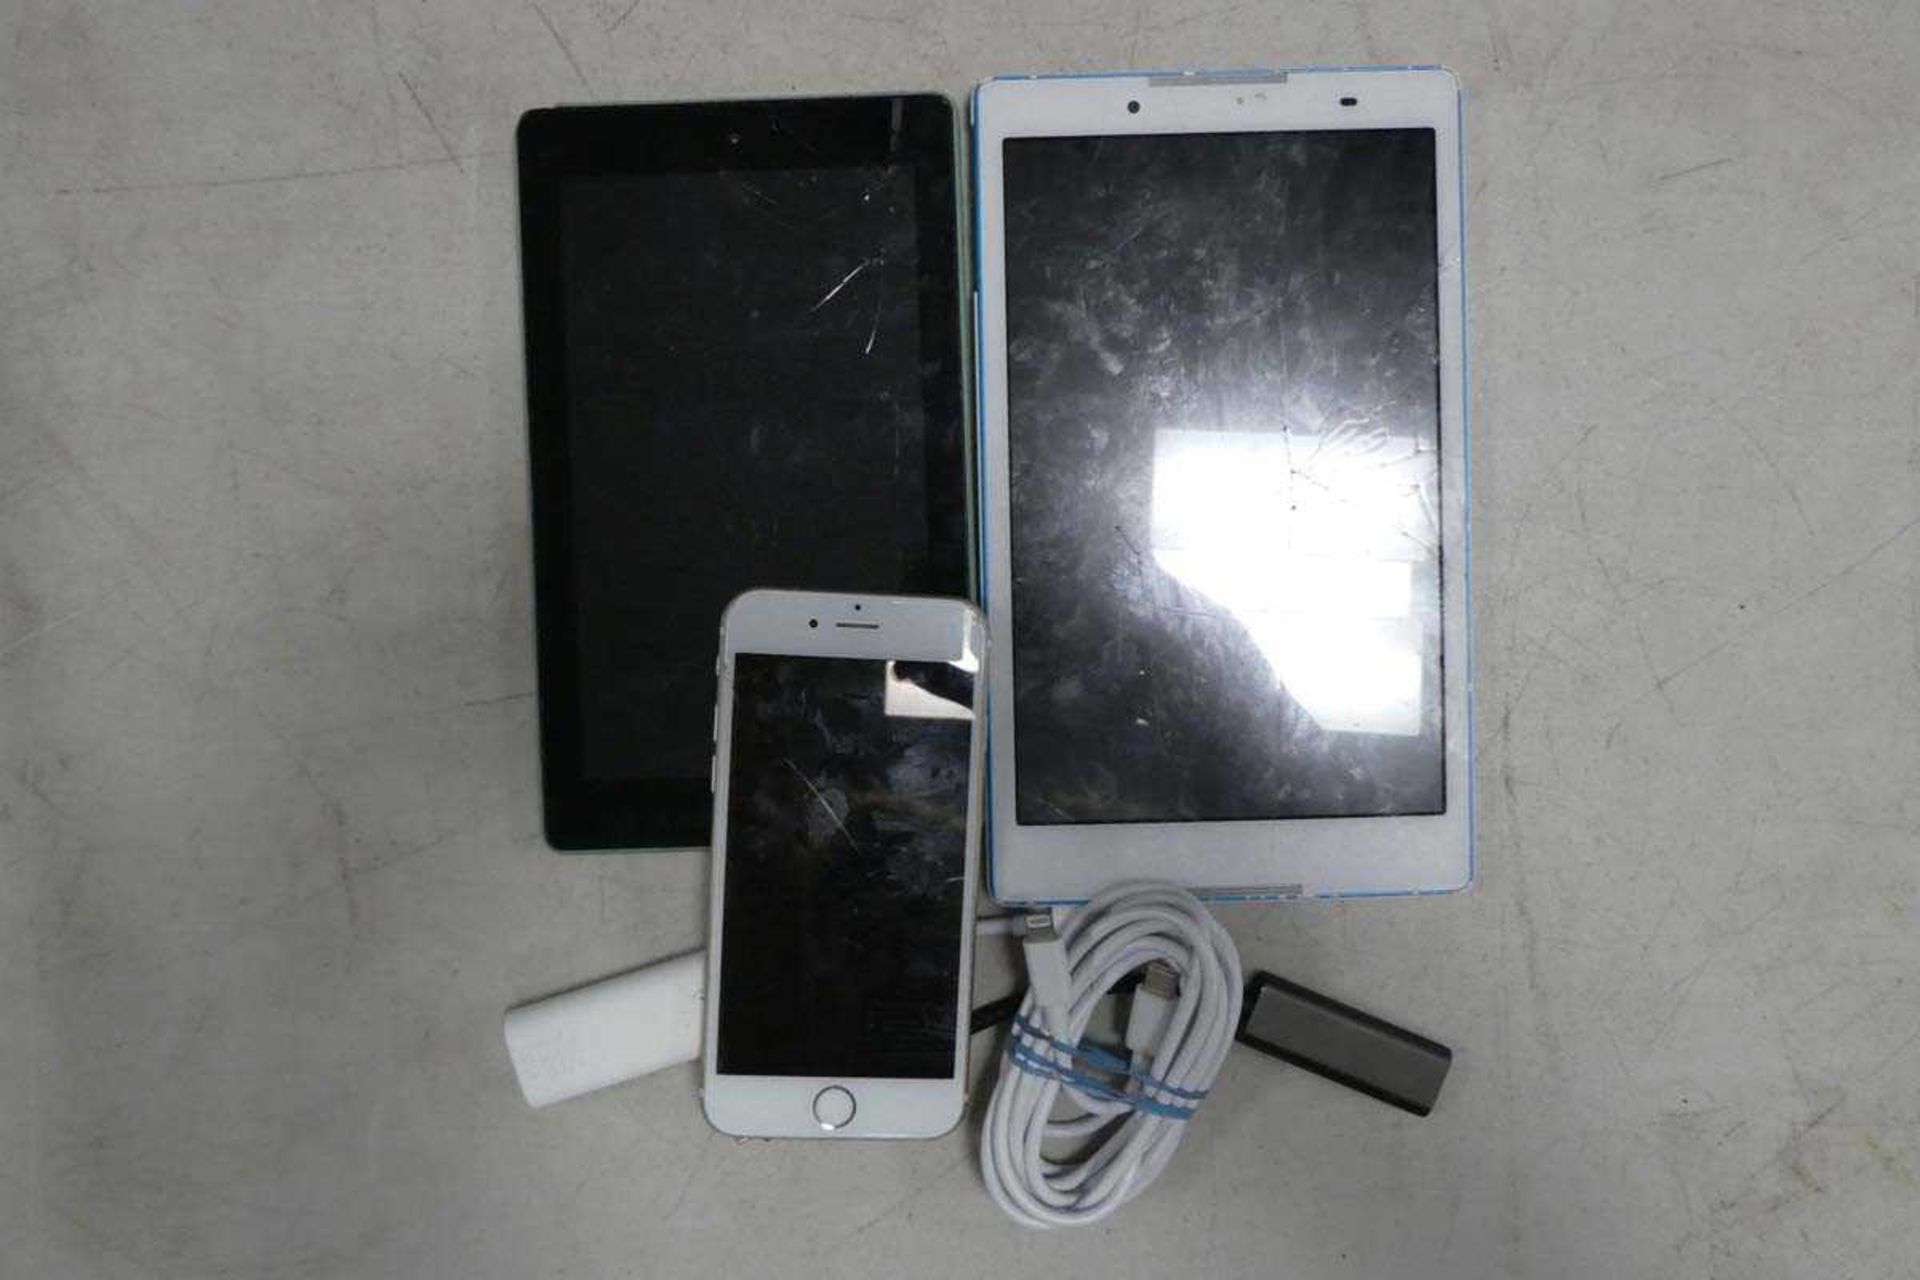 Apple iPhone 6 with cracked screen, possibly locked to iCloud account, Amazon tablet and another